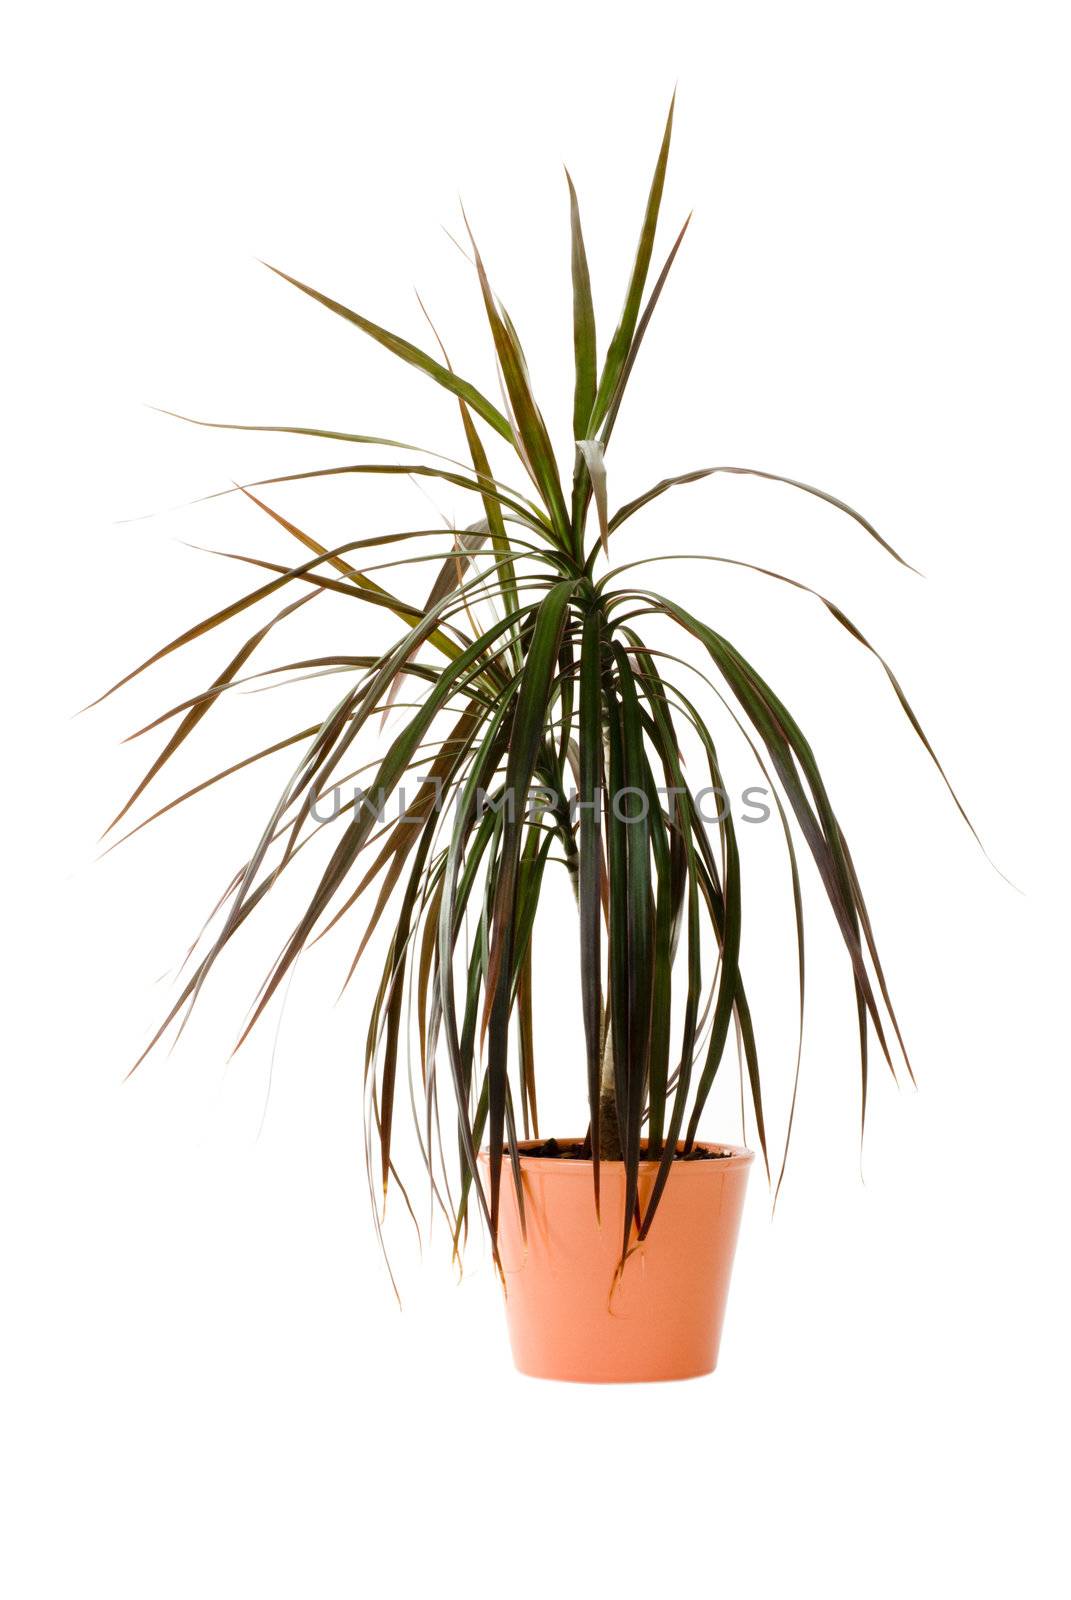 A green plant in a pot on an isolated background.